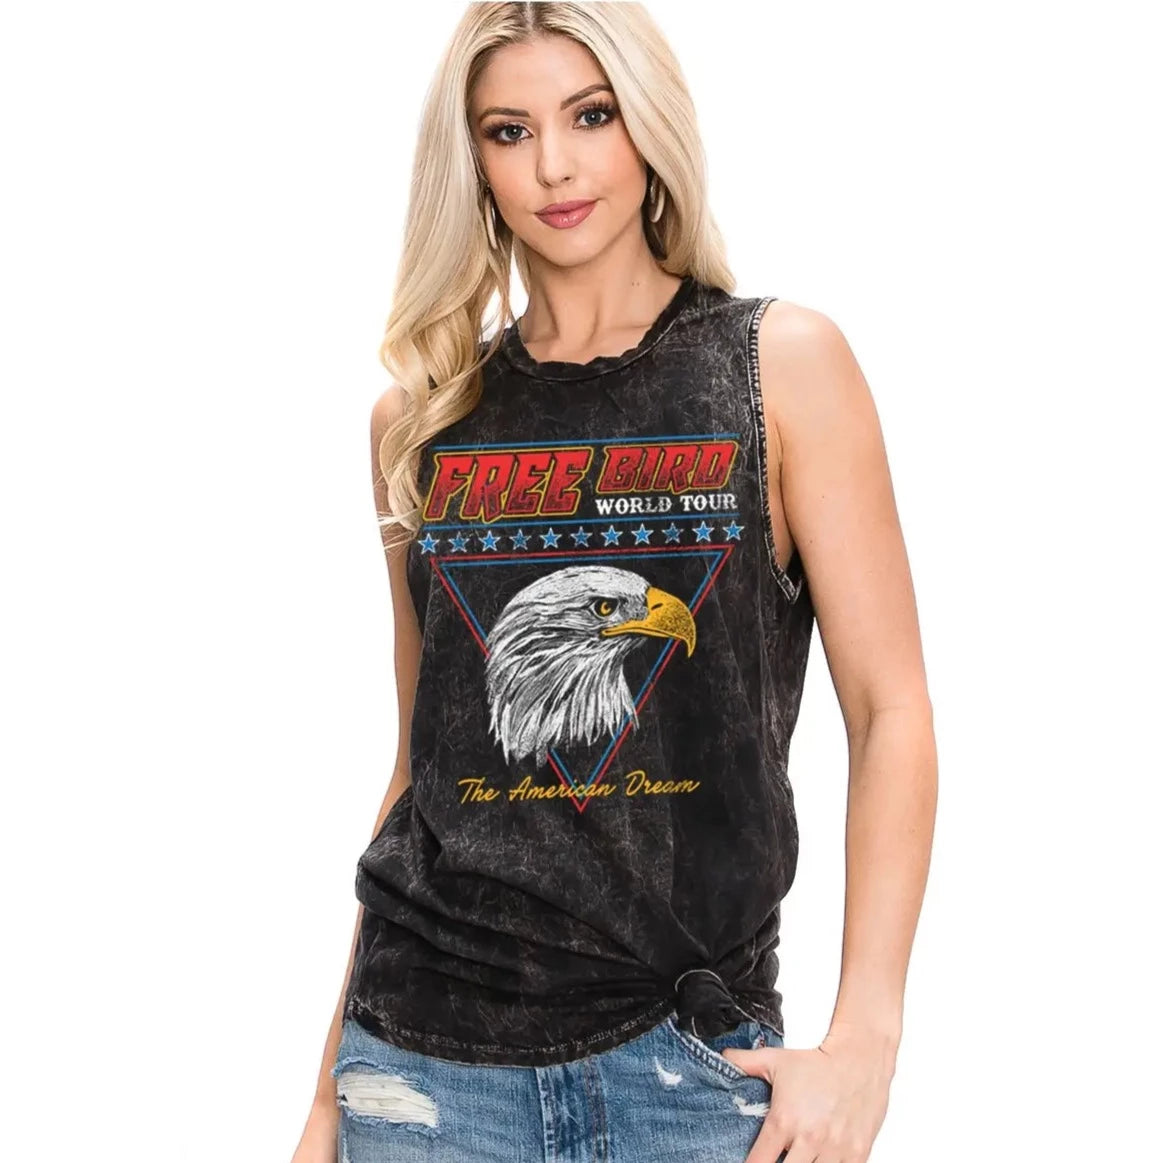 Women's "The American Dream" Mineral Washed Graphic Tank